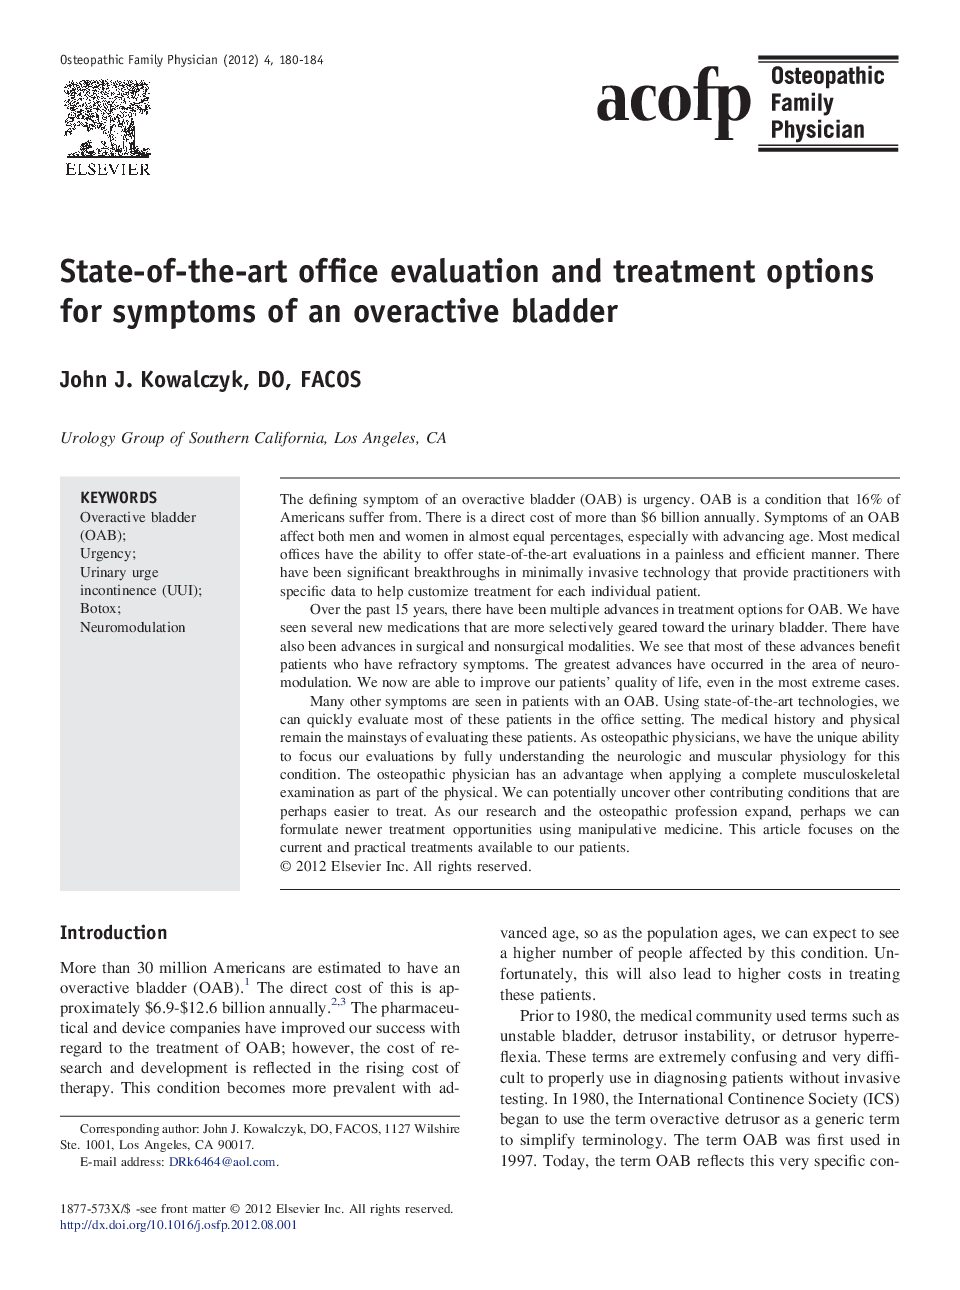 State-of-the-art office evaluation and treatment options for symptoms of an overactive bladder